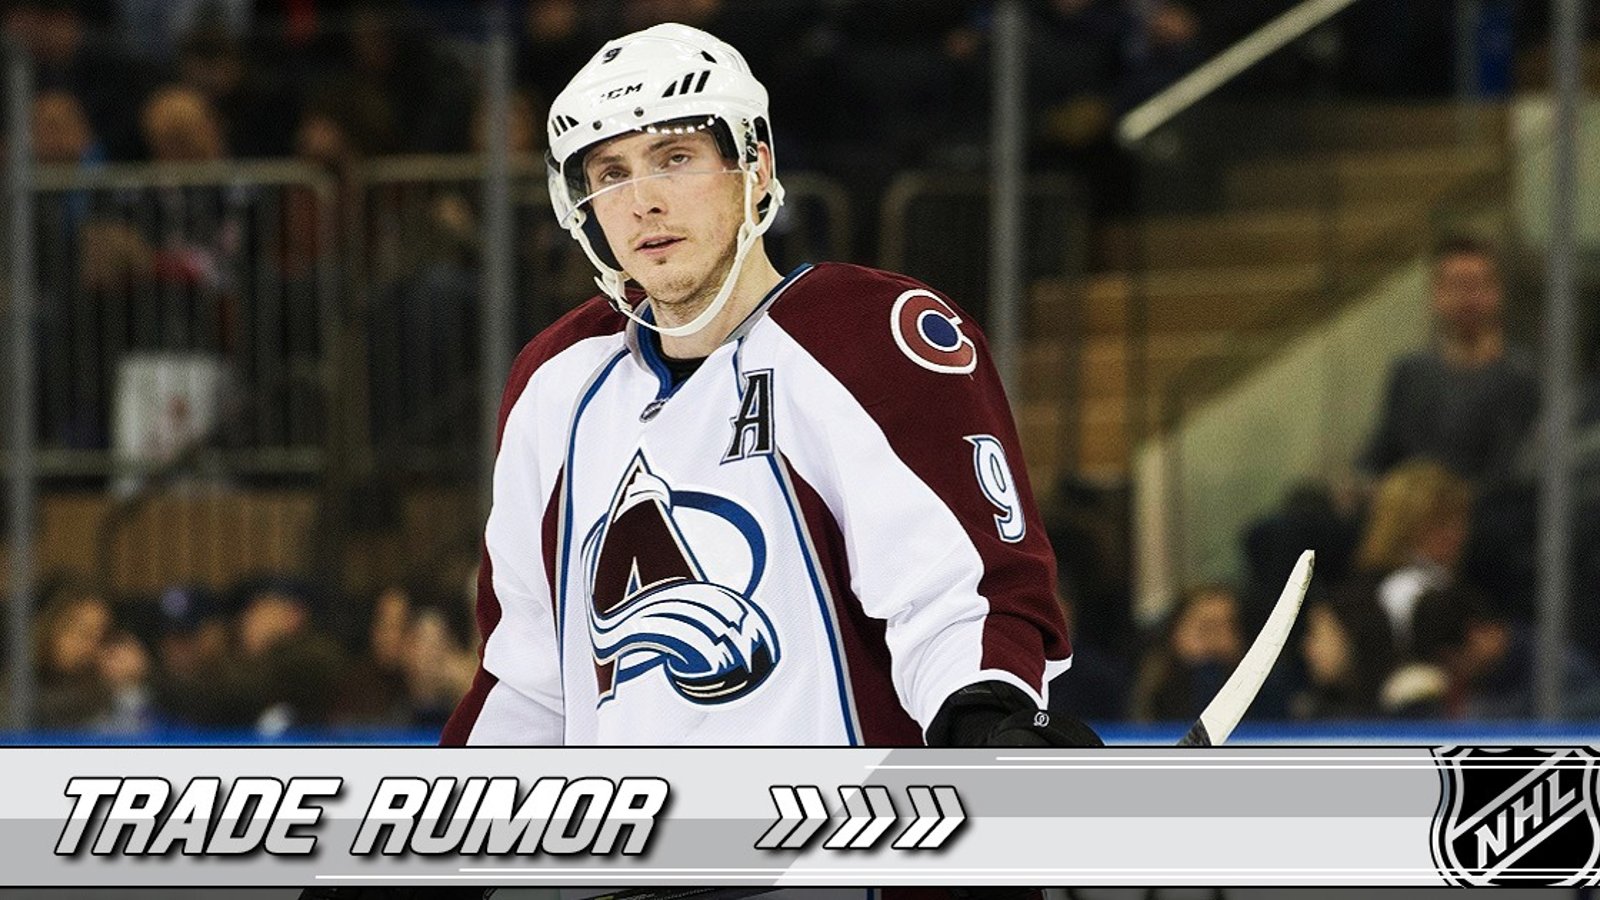 Rumor: Duchene could be traded for 20-year-old former first round draft pick.